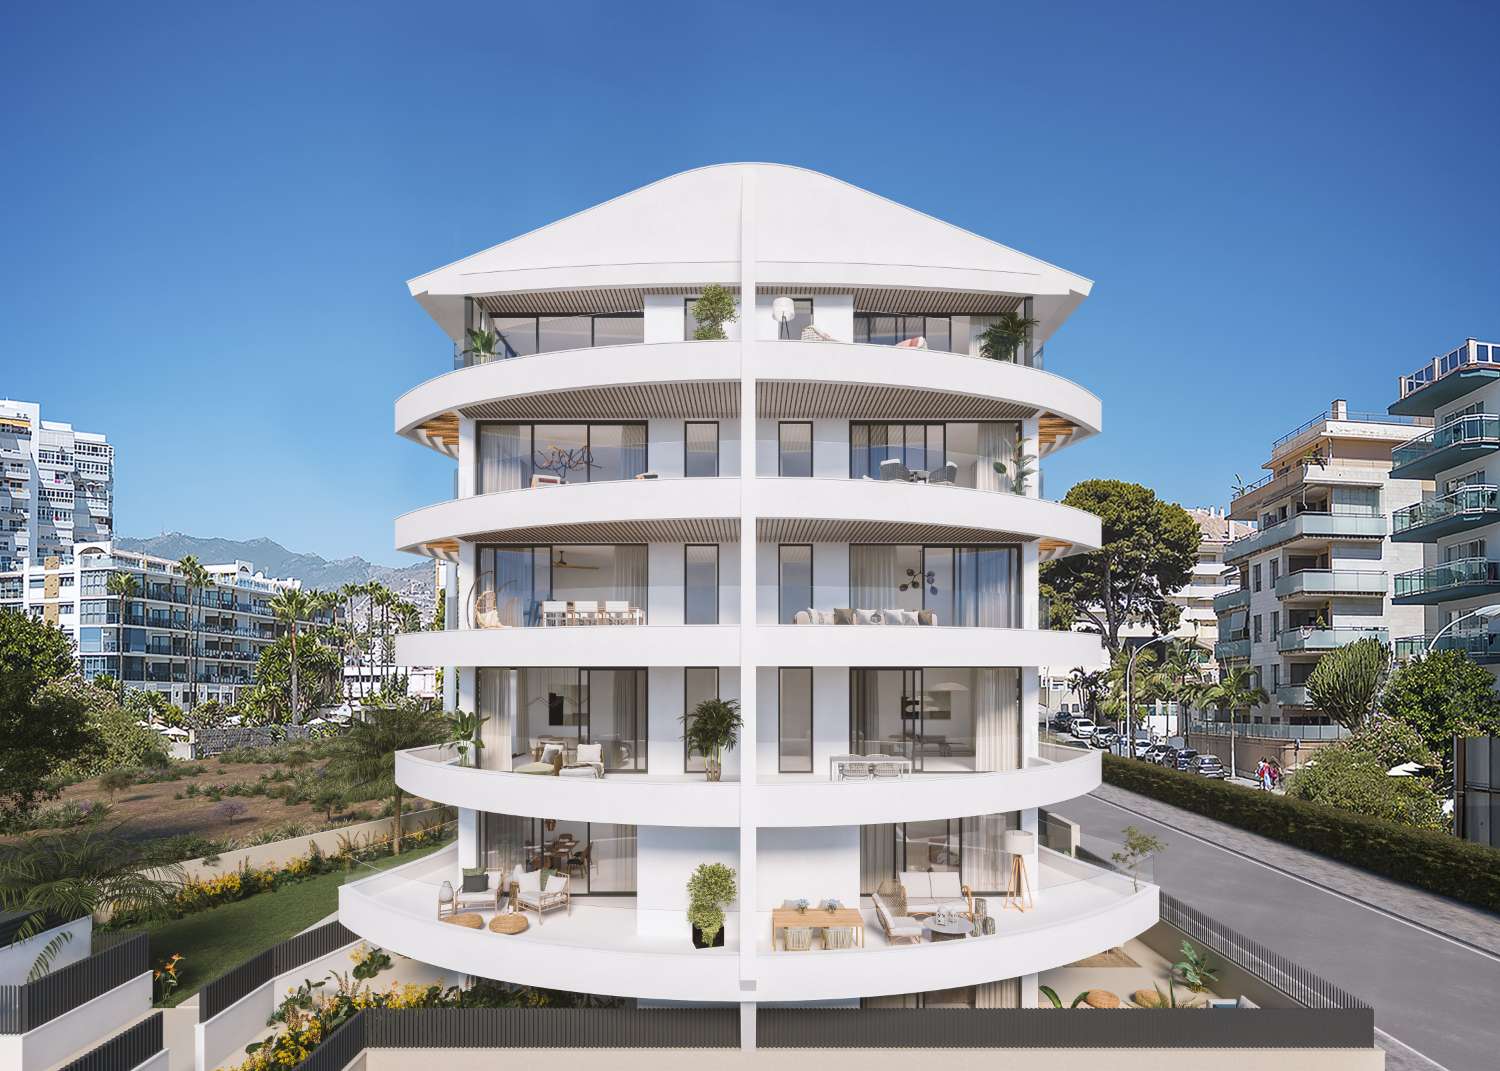 NEW BUILD PENTHOUSE WITH SPECTACULAR SEA VIEWS FOR SALE IN BENALMADENA COSTA